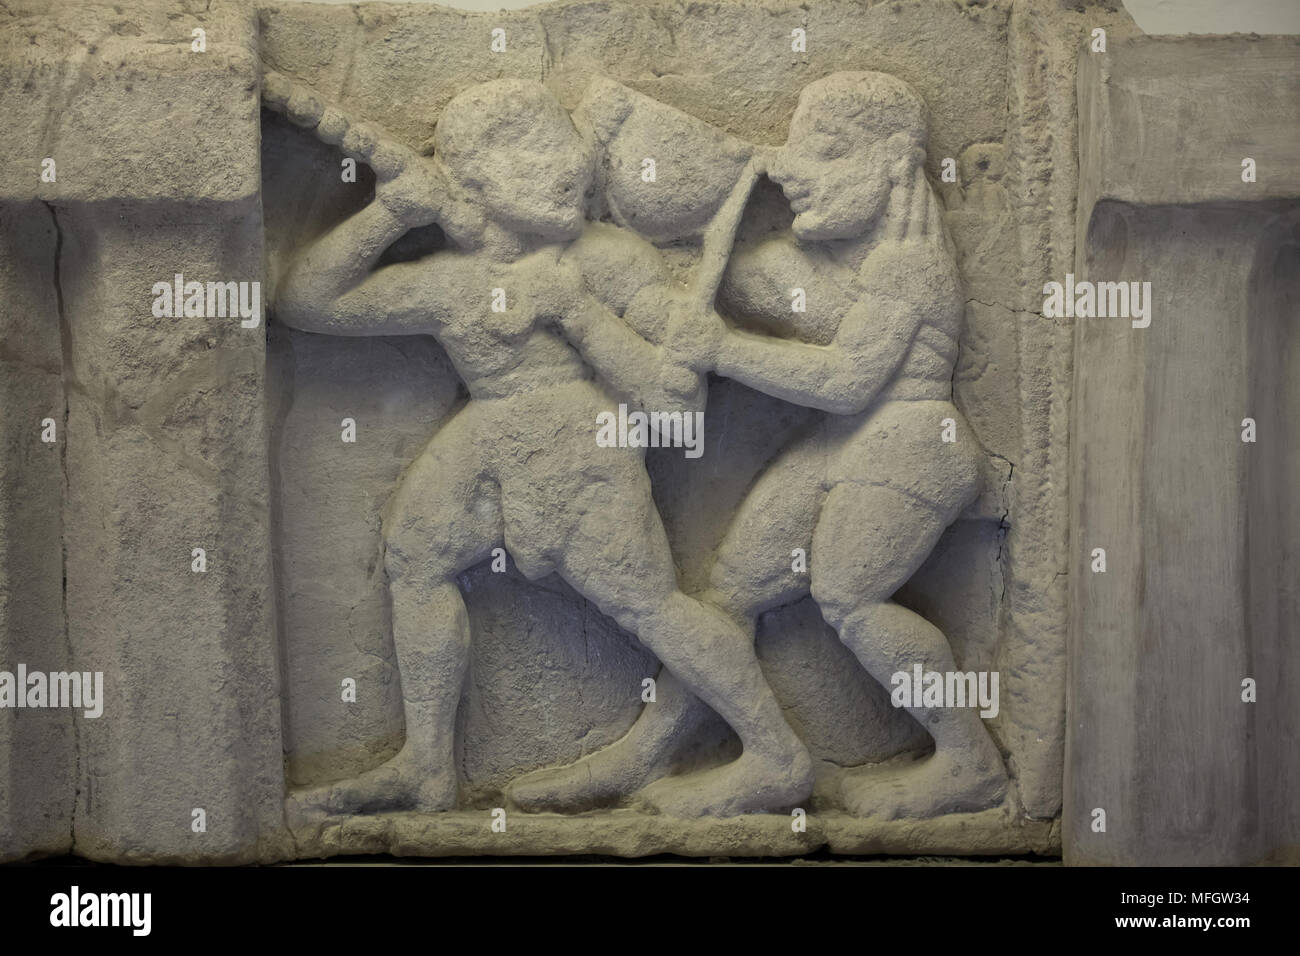 Apollo and Heracles struggle for the Delphic tripod. Archaic sandstone metope from the Heraion (First Temple of Hera) at Foce del Sele dated from the middle of the 6th century BC on display in the Paestum Archaeological Museum (Museo archeologico di Paestum) in Paestum, Campania, Italy. Stock Photo